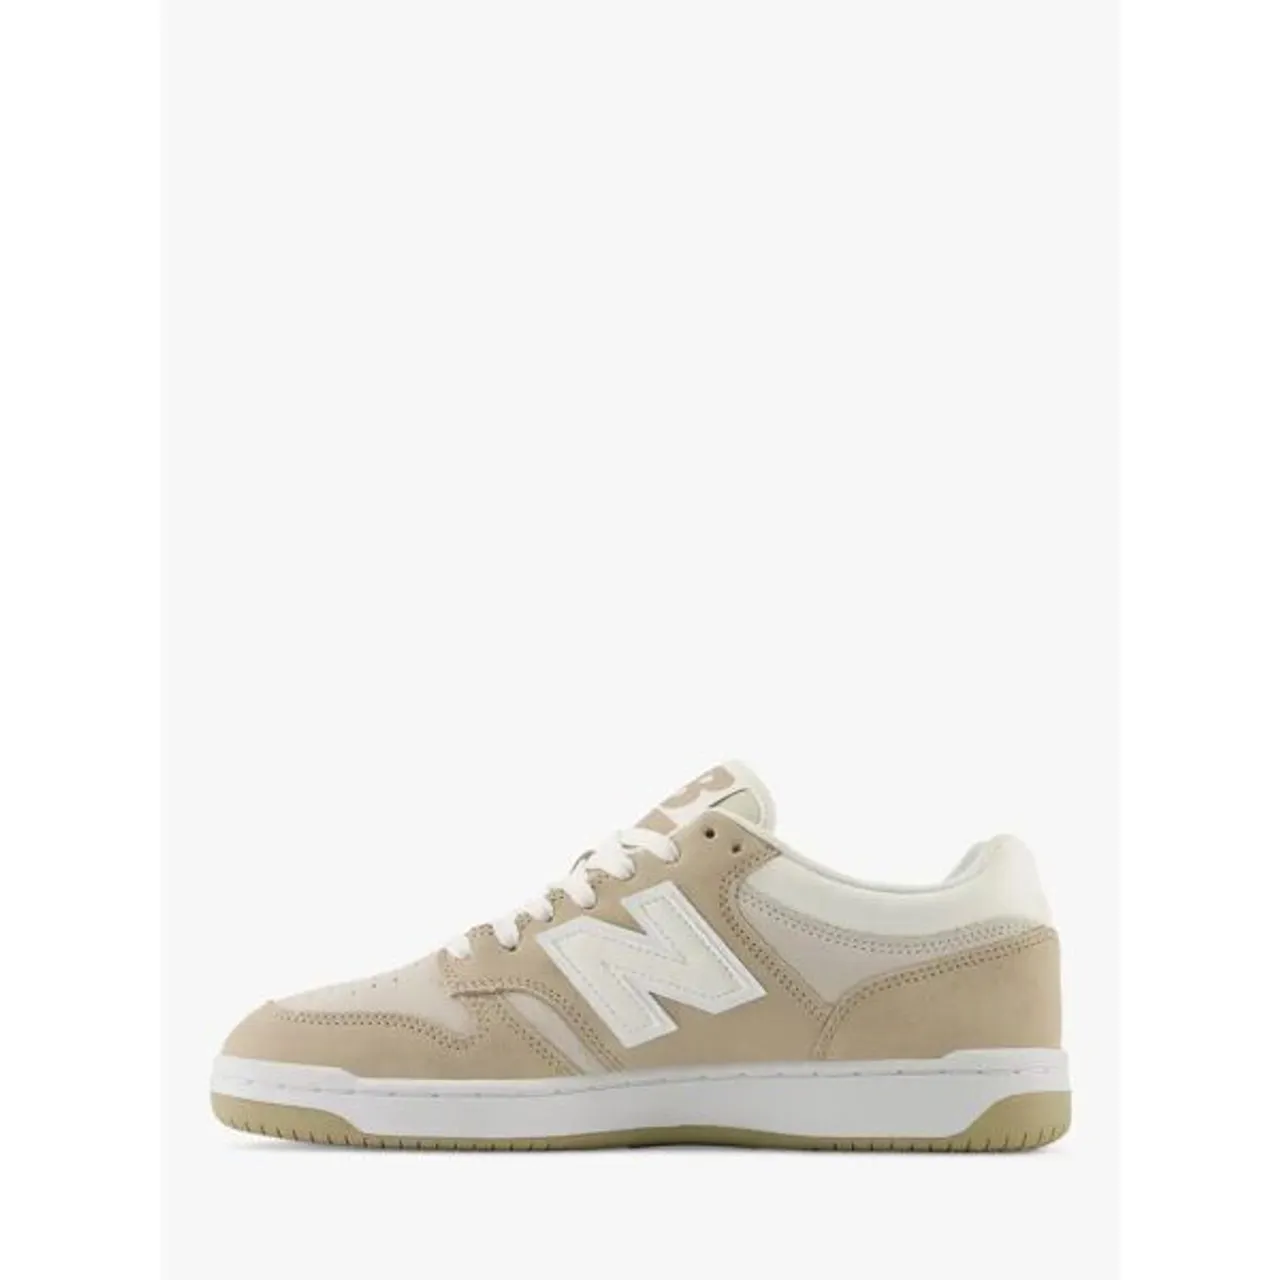 New Balance 480 Lace Up Trainers - Natural - Male